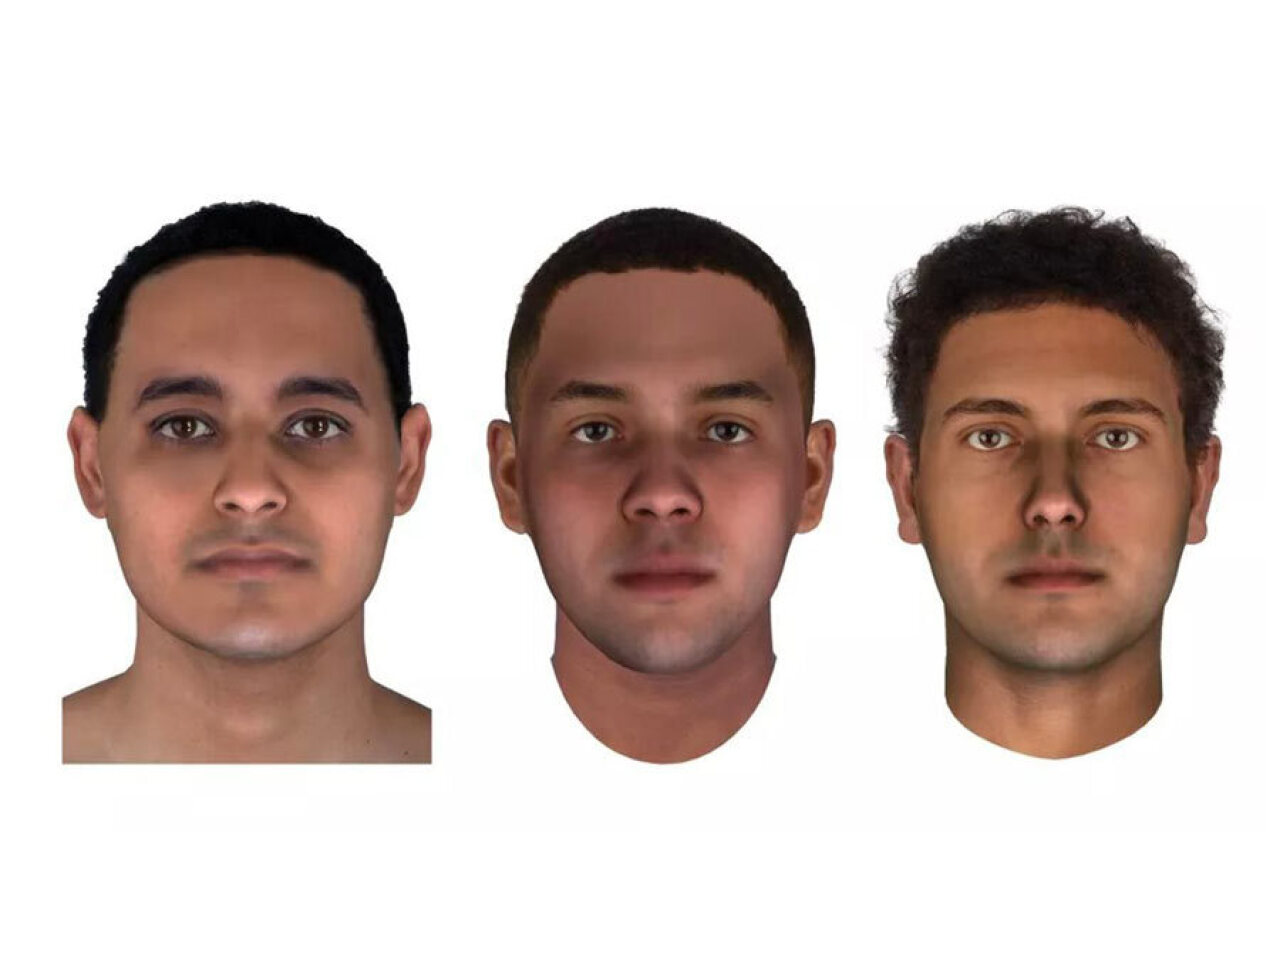 [IMAGE] Three 2000-year-old Egyptian Mummy Faces Reconstructed!